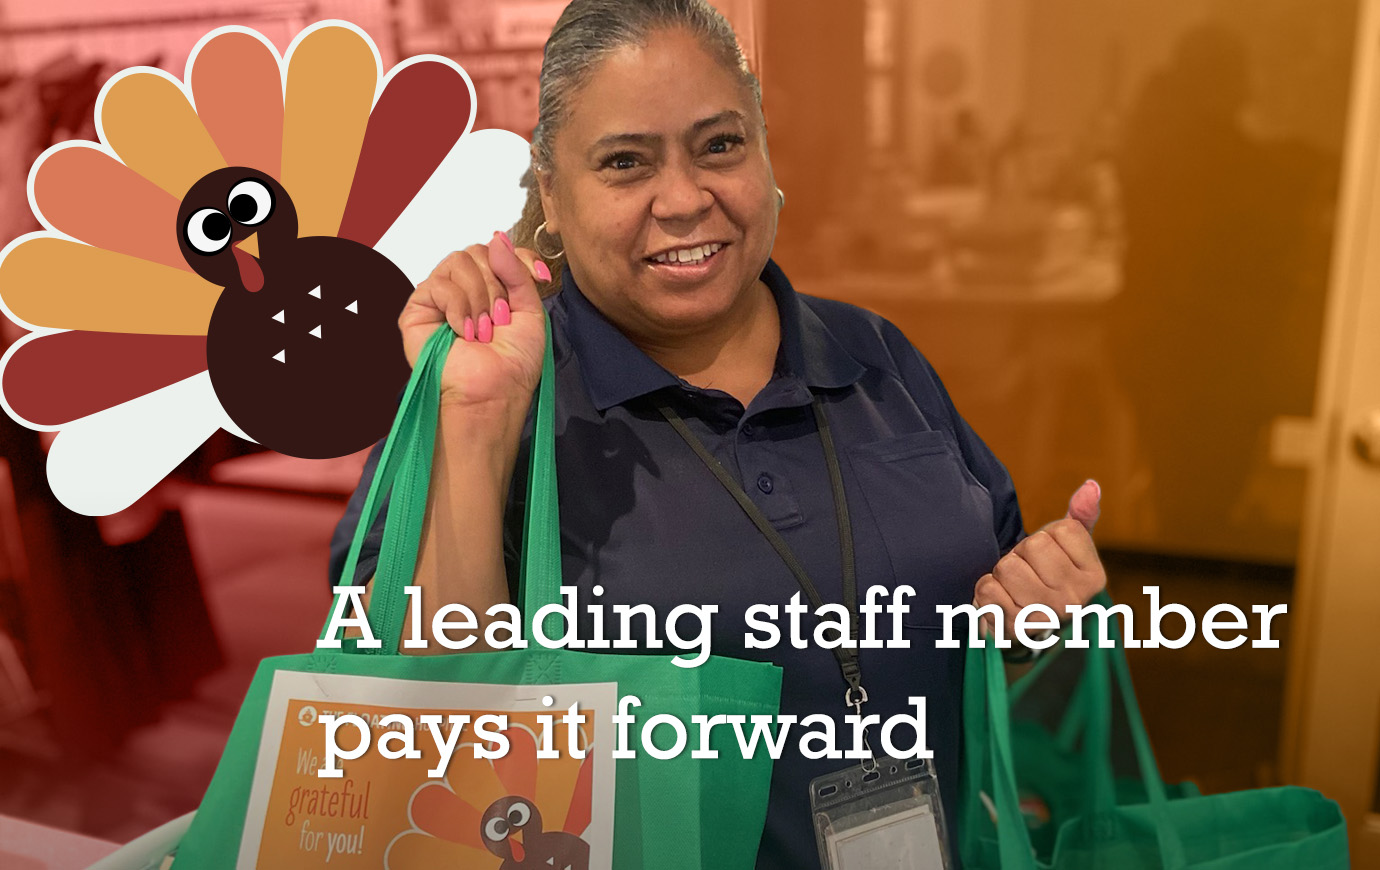 A leading staff member pays it forward